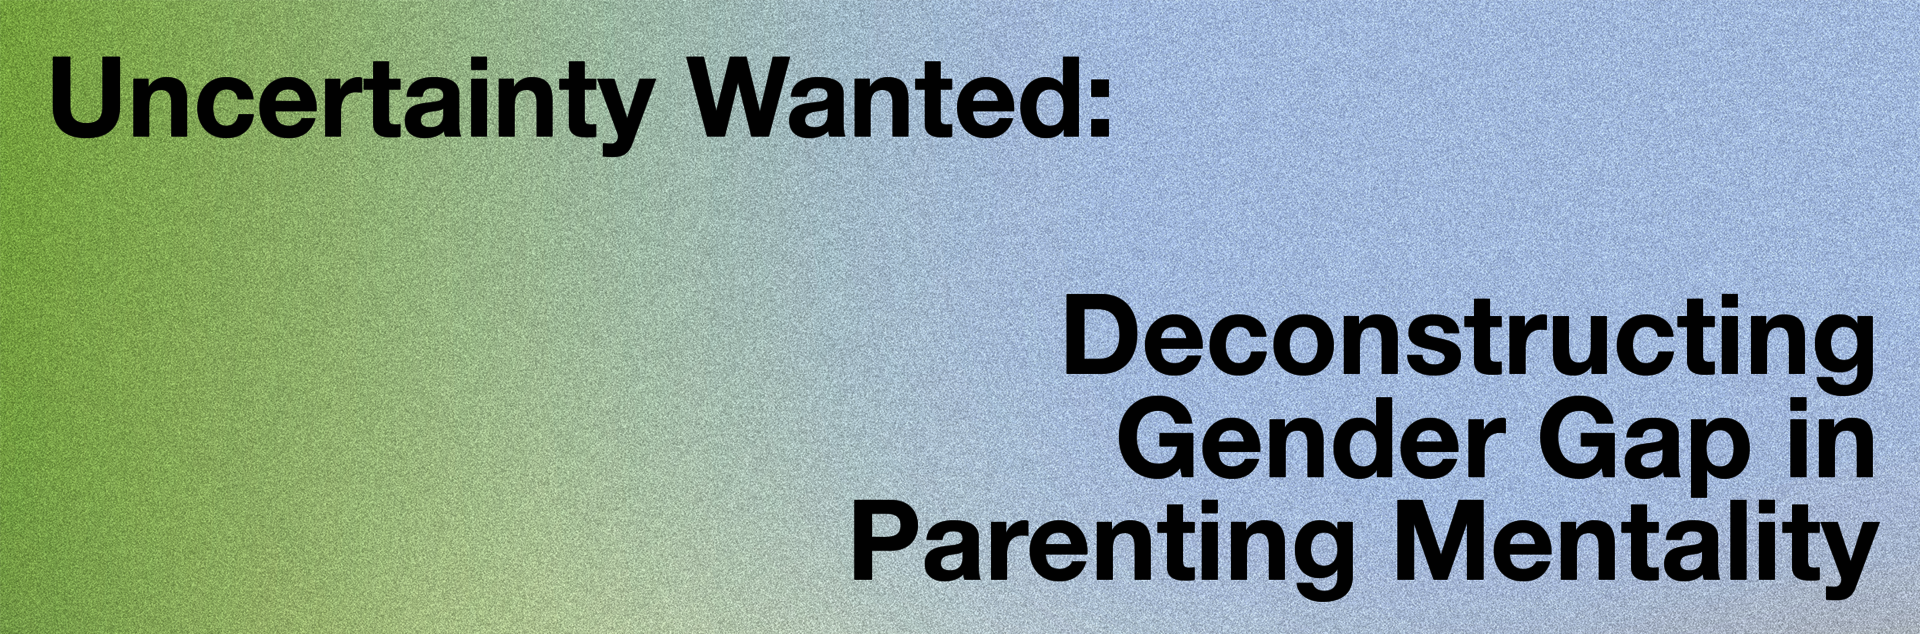 title: uncertainty wanted: deconstructing gender gap in parenting mentality